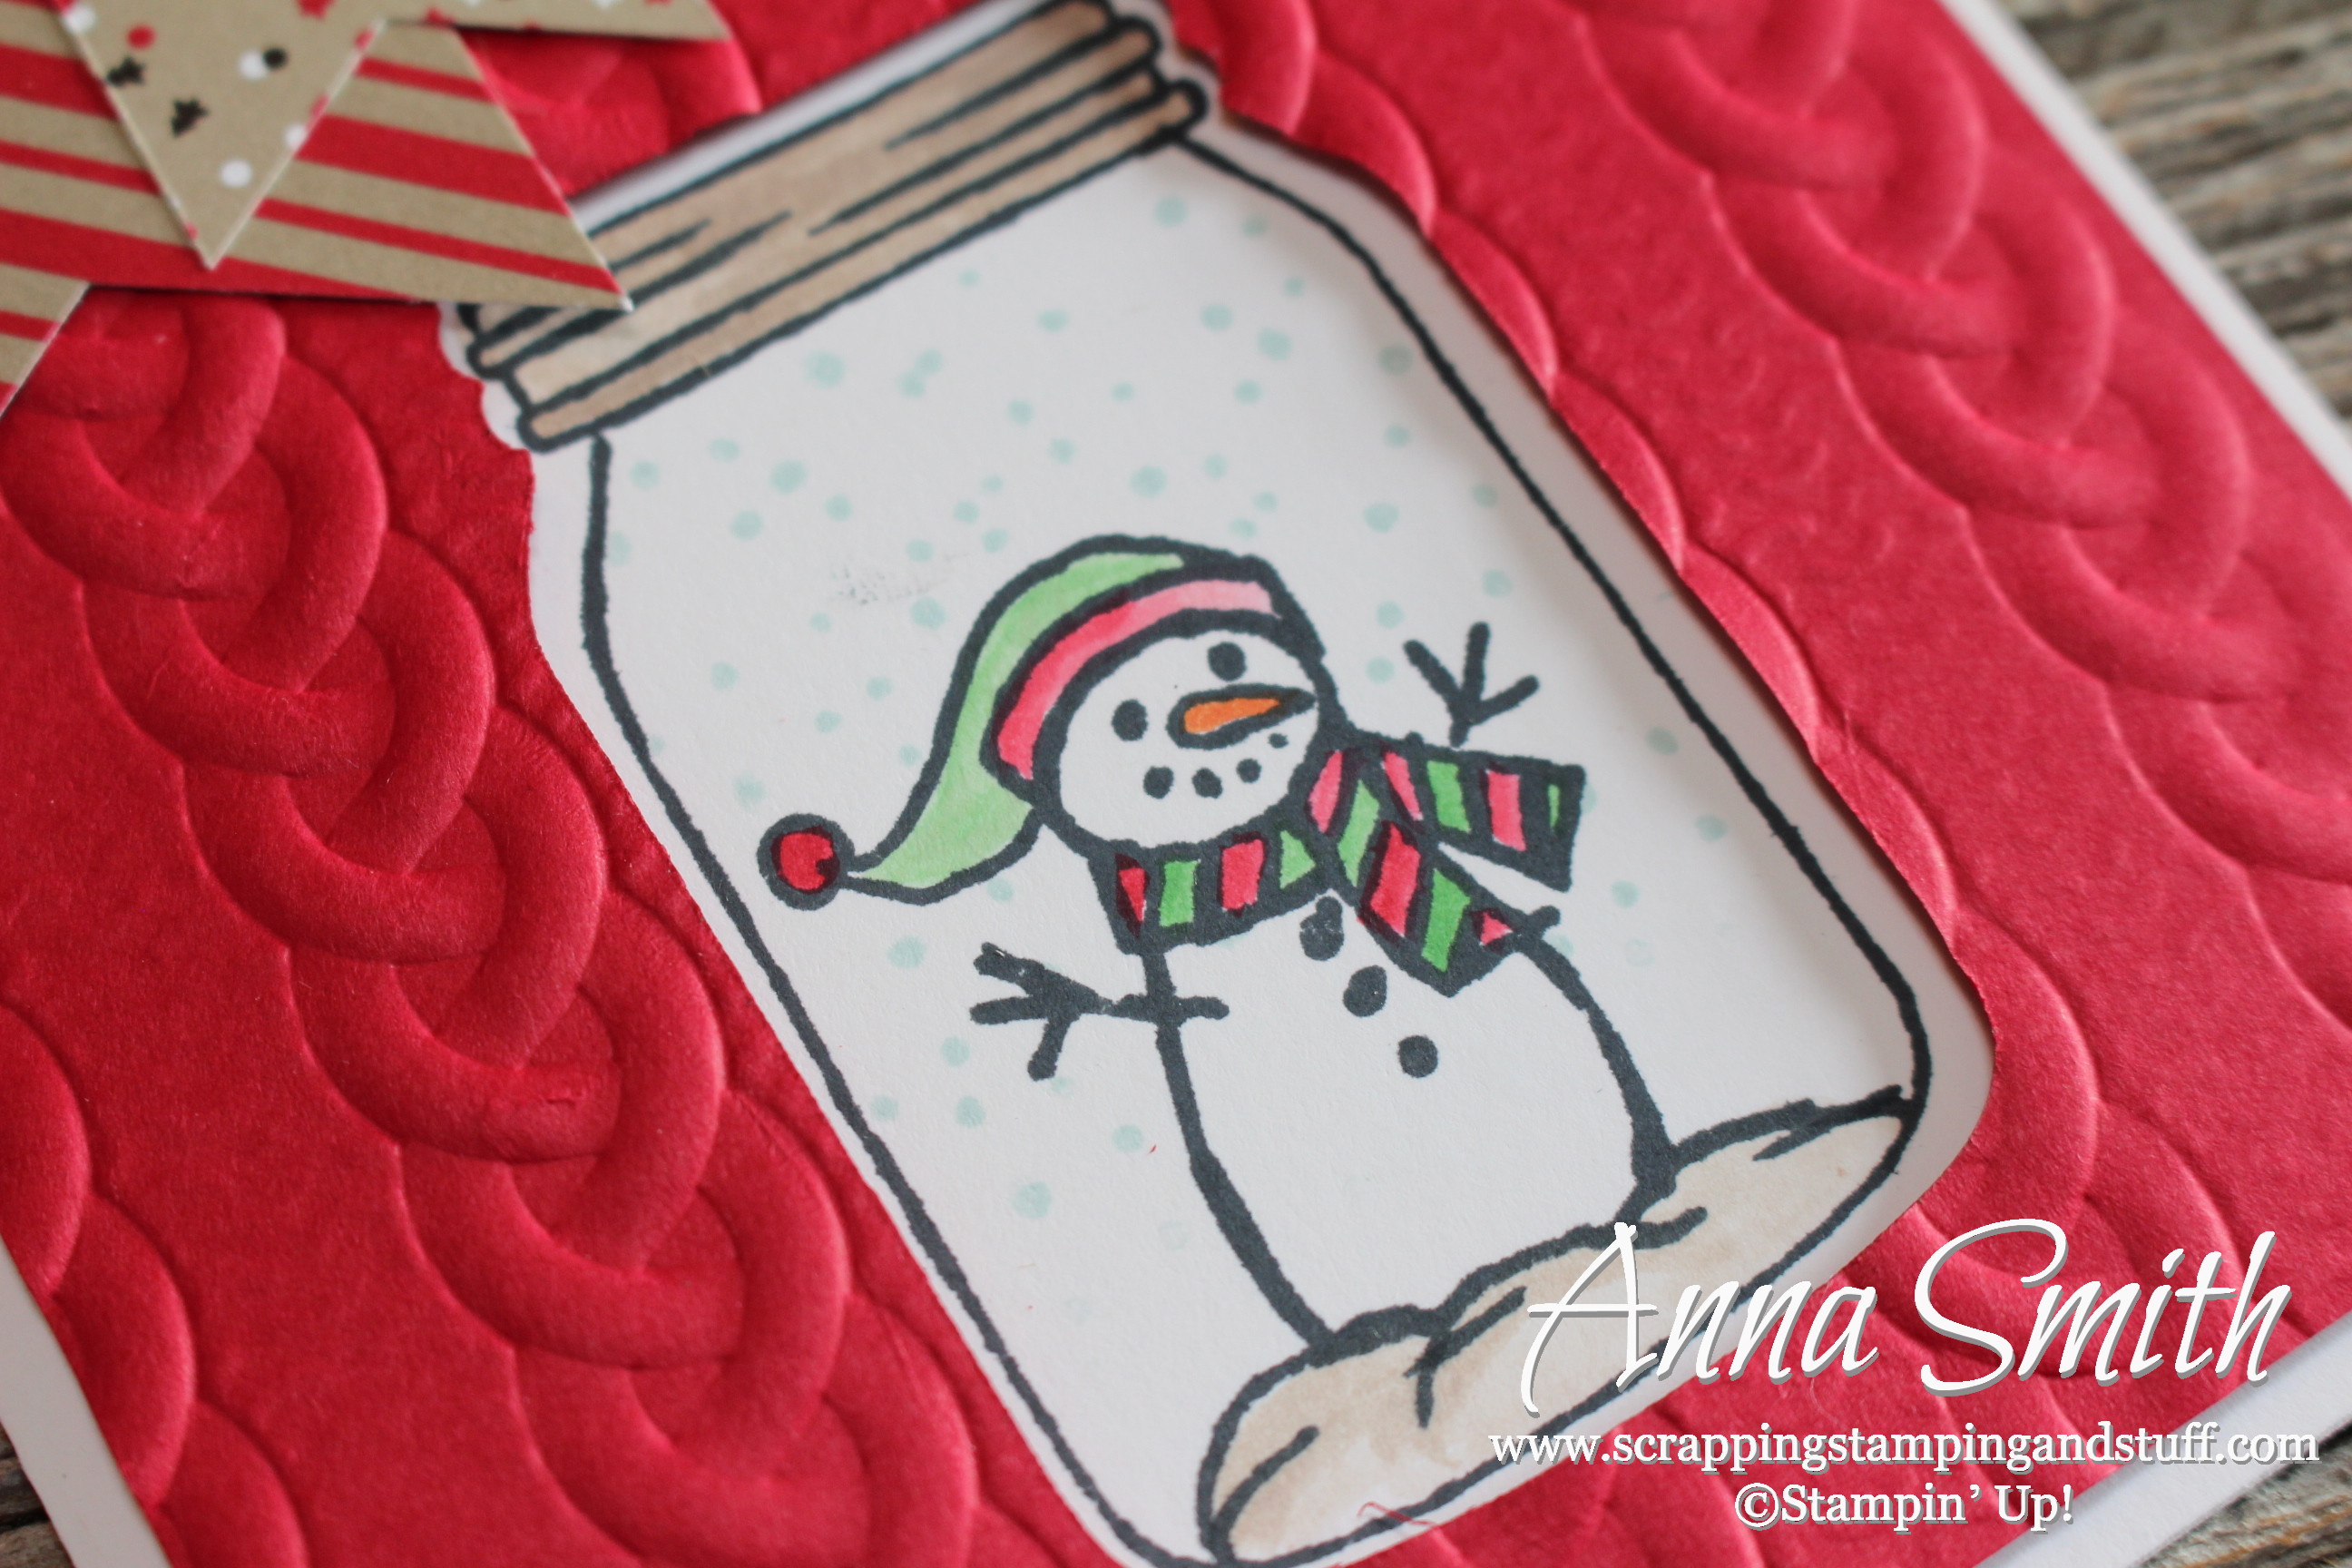 Stampin' Up! Jar of Cheer snowman Christmas card made with the Cable Knit embossing folder